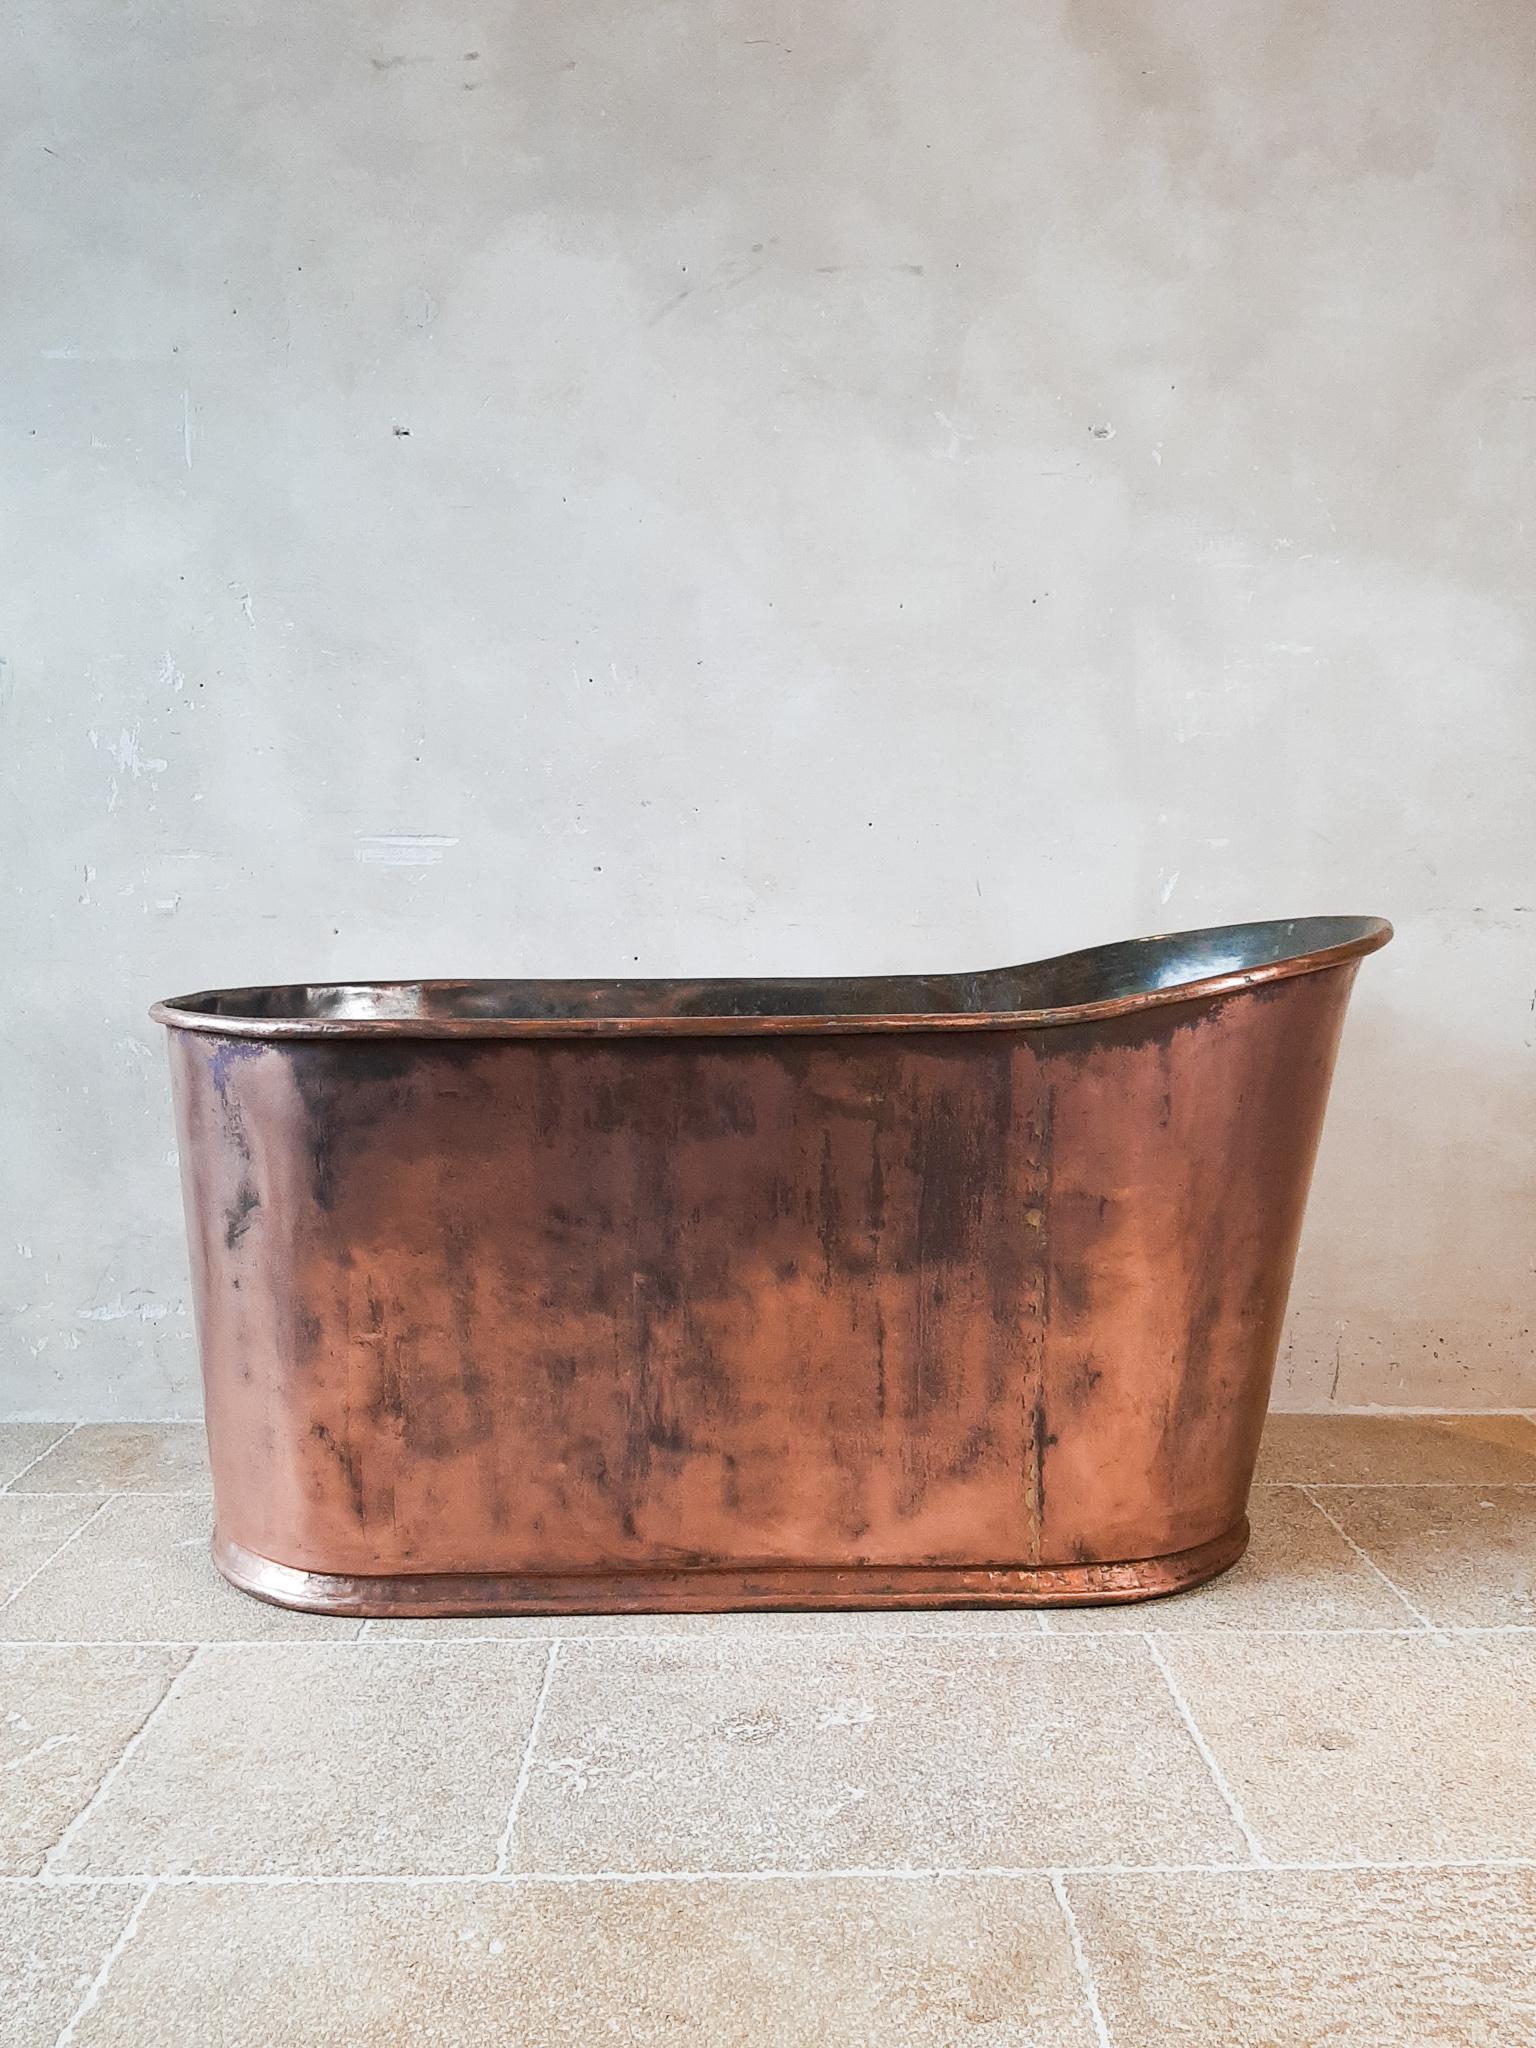 Beautiful antique early 19th century copper bathtub. Made in France in the Empire style. This is an Asymmetrical bathtub that you sit in, which is why this bathtub is quite high.

Measures: 141 cm long, 63 cm wide and 75 cm high.